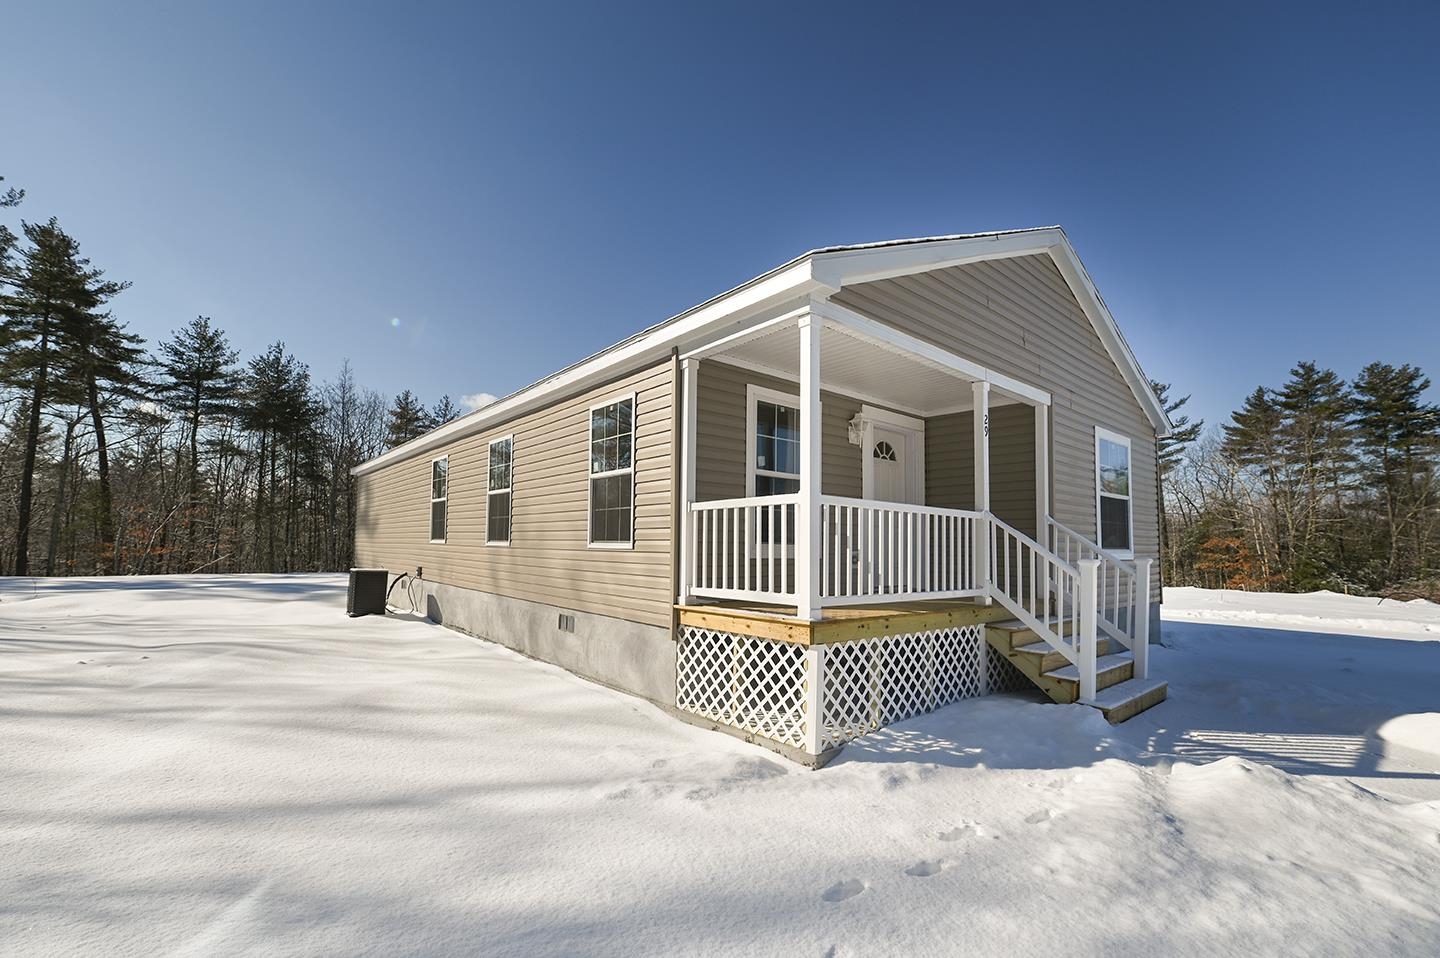 29 Sharon Way, Fremont, New Hampshire, NH 03044, 2 Bedrooms Bedrooms, 6 Rooms Rooms,1 BathroomBathrooms,Mobile Home,For Sale,4892904